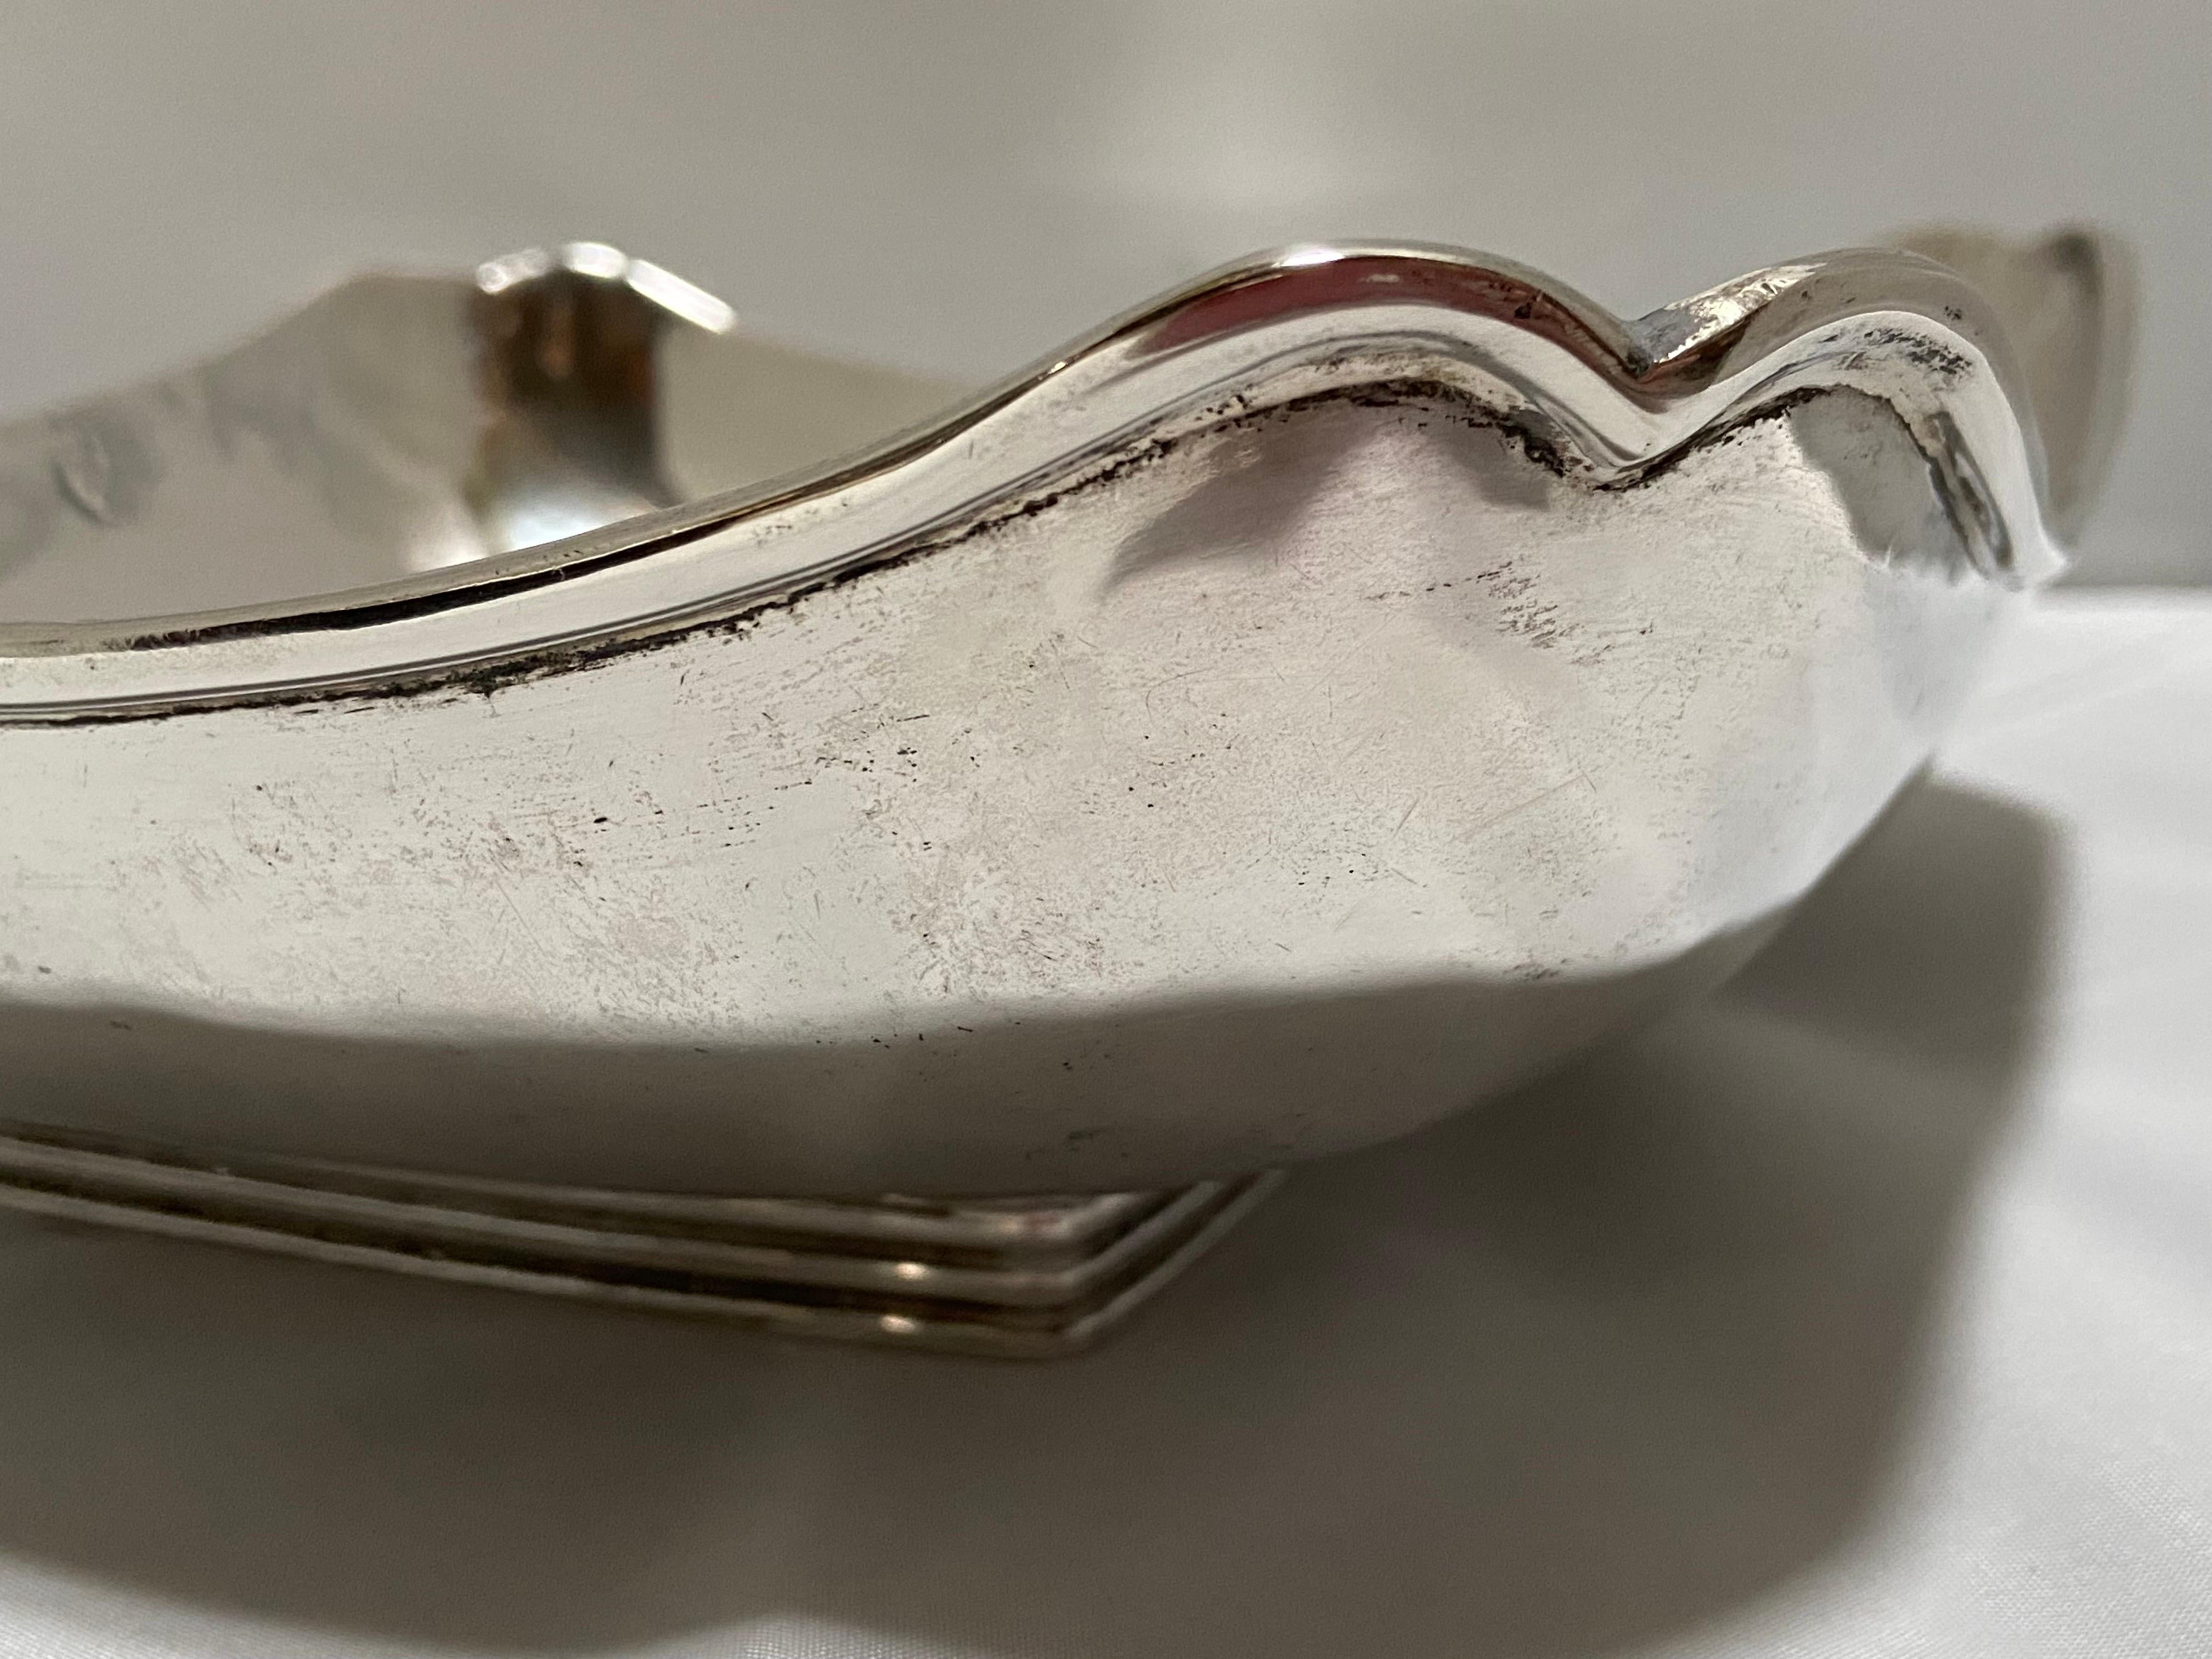 Vintage Mexican Mid-Century Modern Sterling Silver Scalloped Bowl by C. Zurita For Sale 5